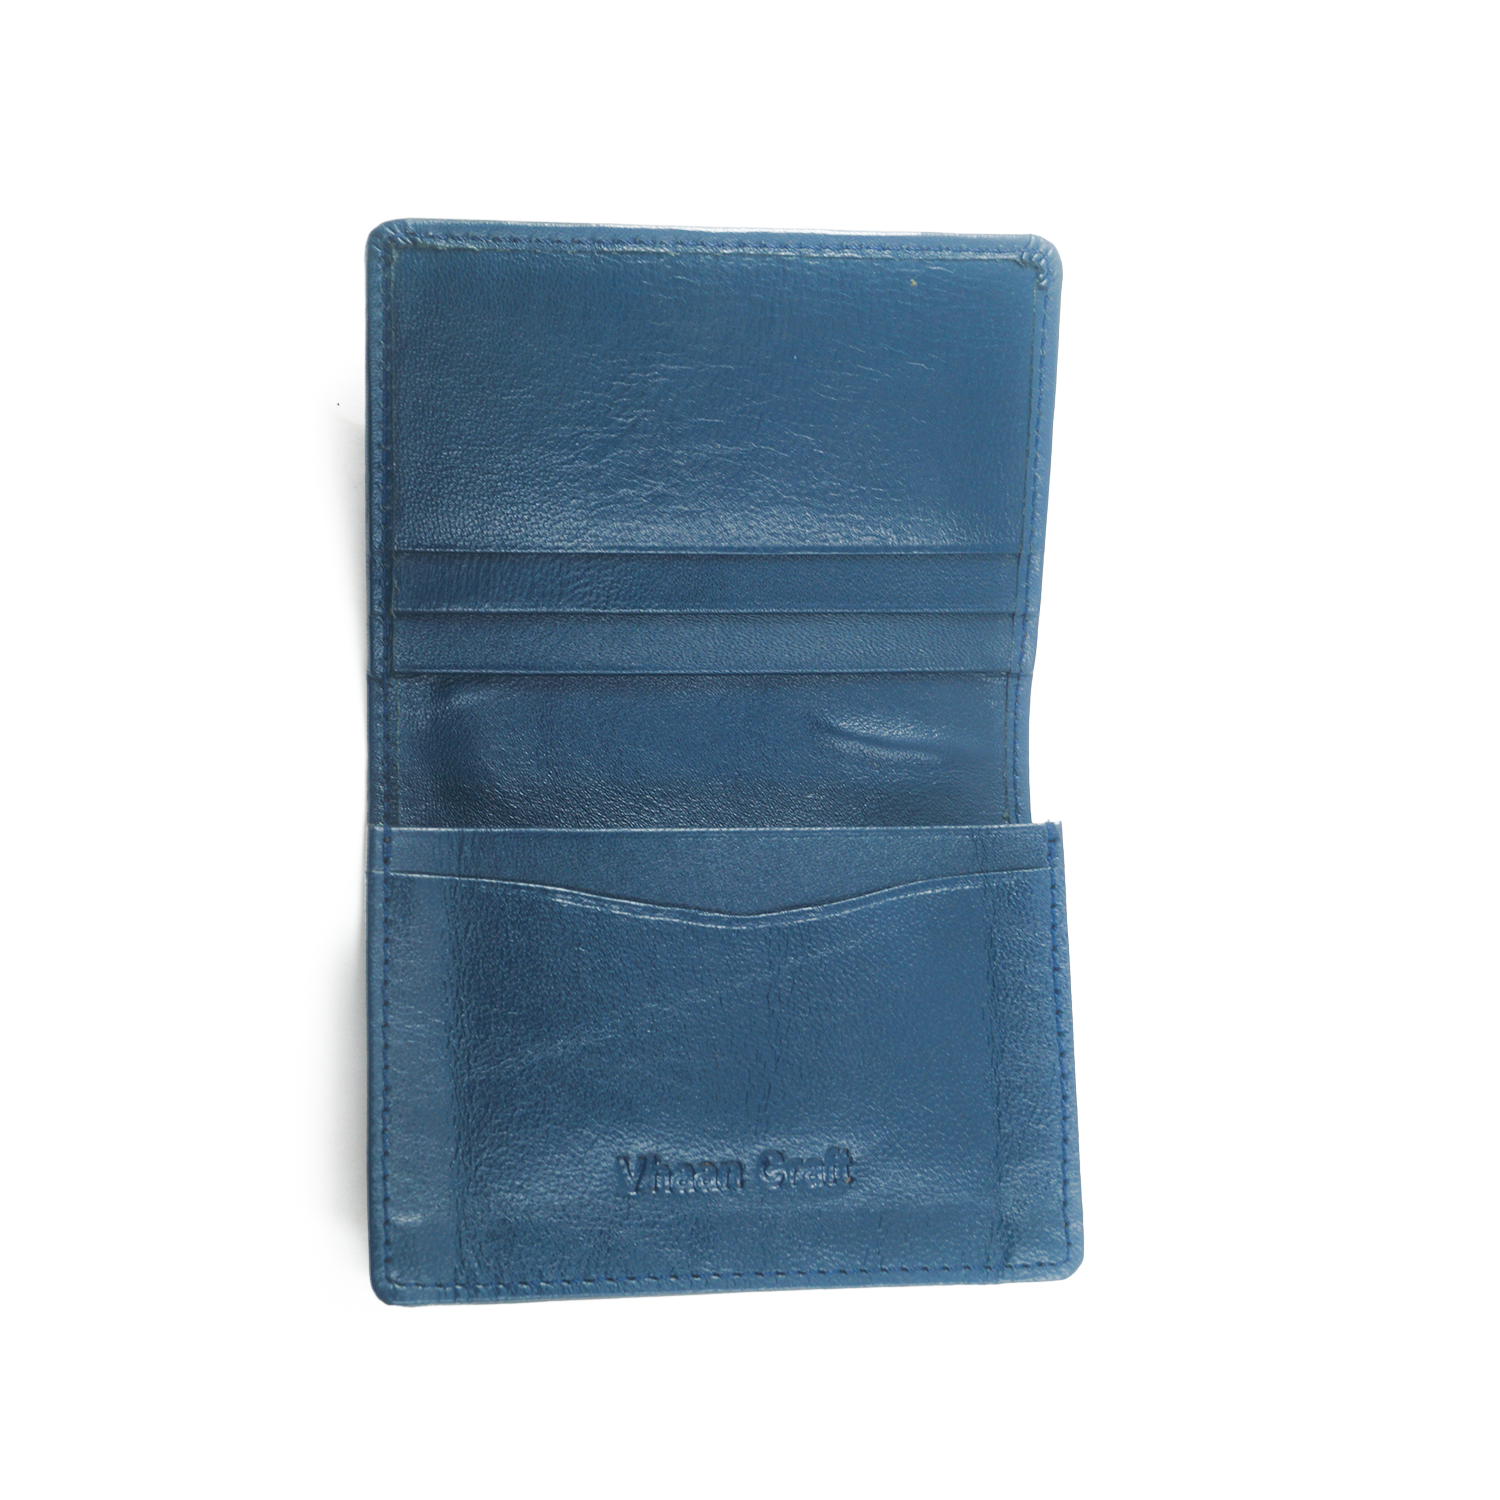 Premium Leather Card Holder with Protective Cover by Vhaan - Blue